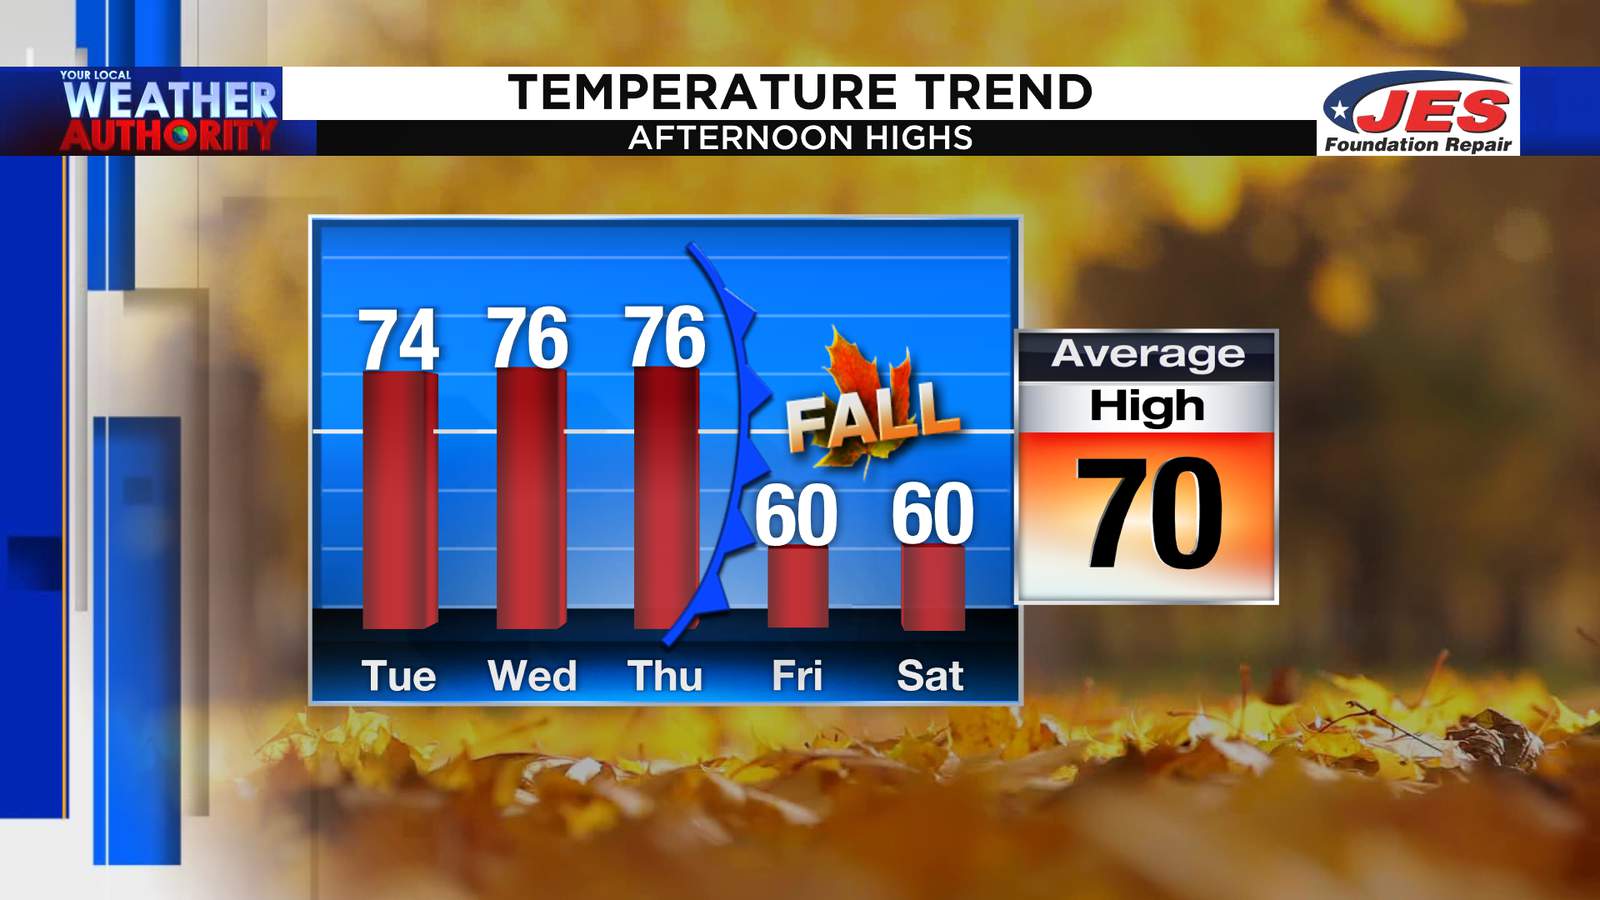 Finally! Sunshine gradually returns to warm things up prior to weekend cool snap